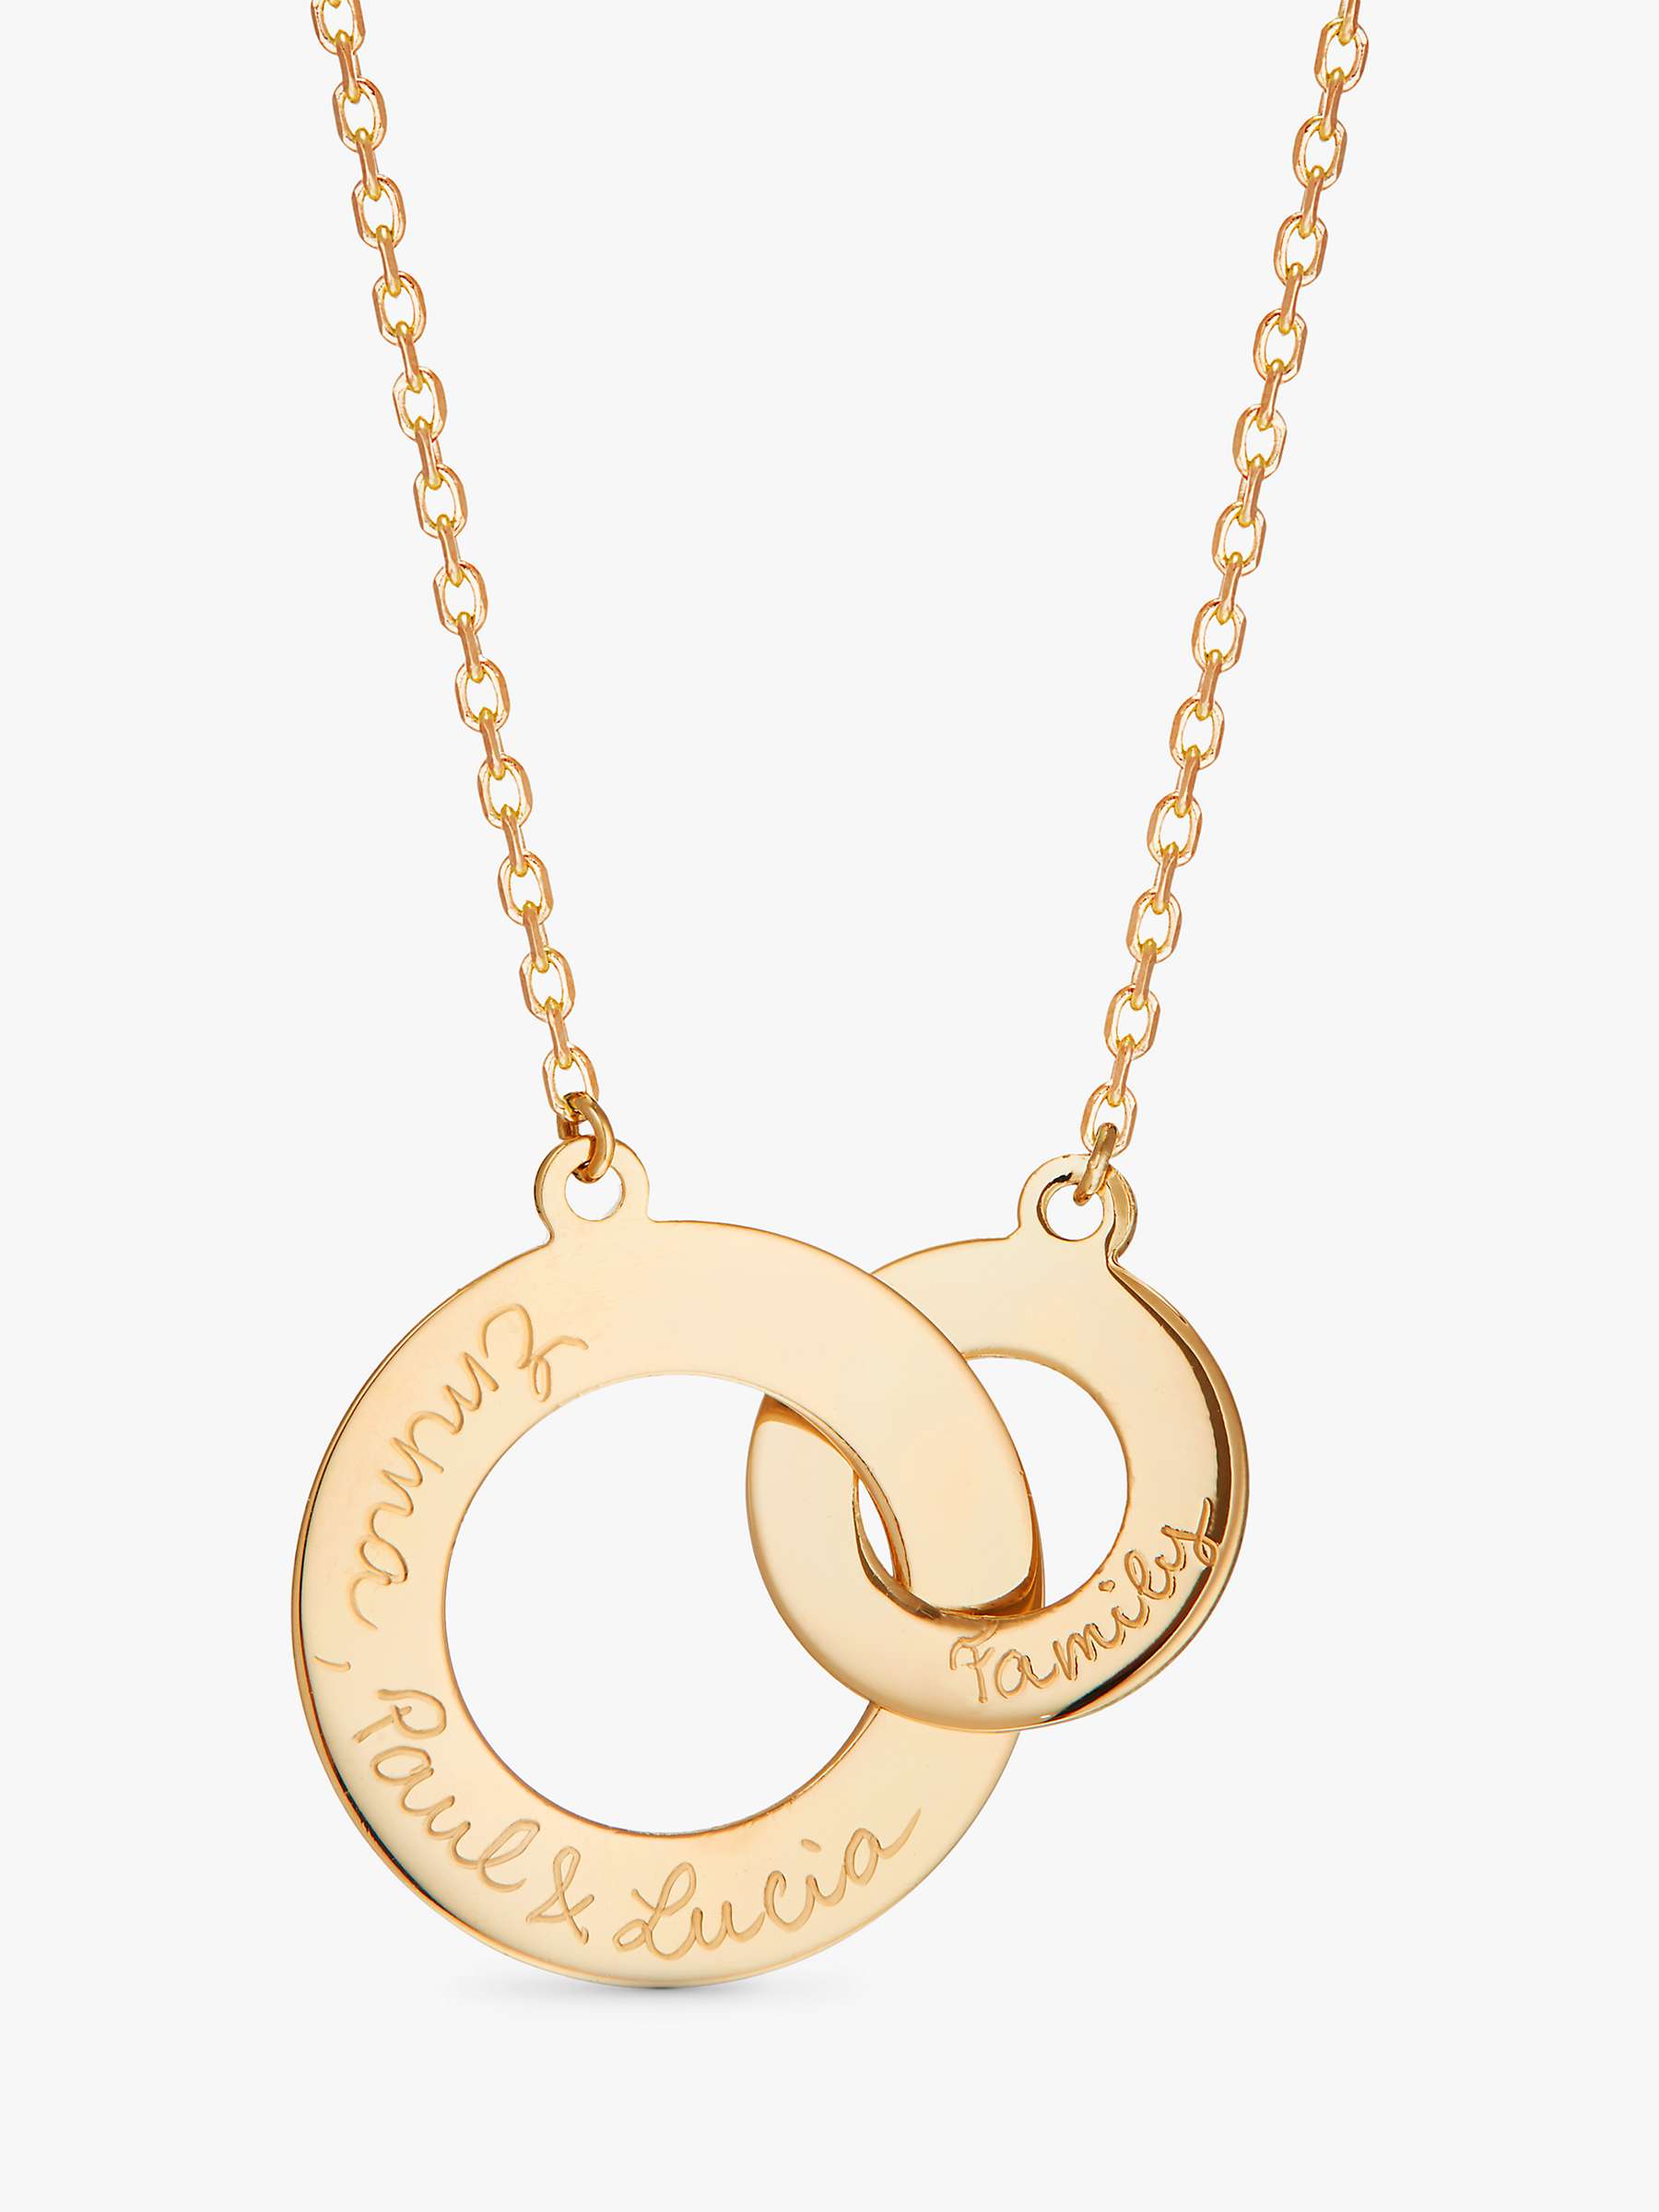 Buy Merci Maman Personalised Intertwined Charm Necklace Online at johnlewis.com